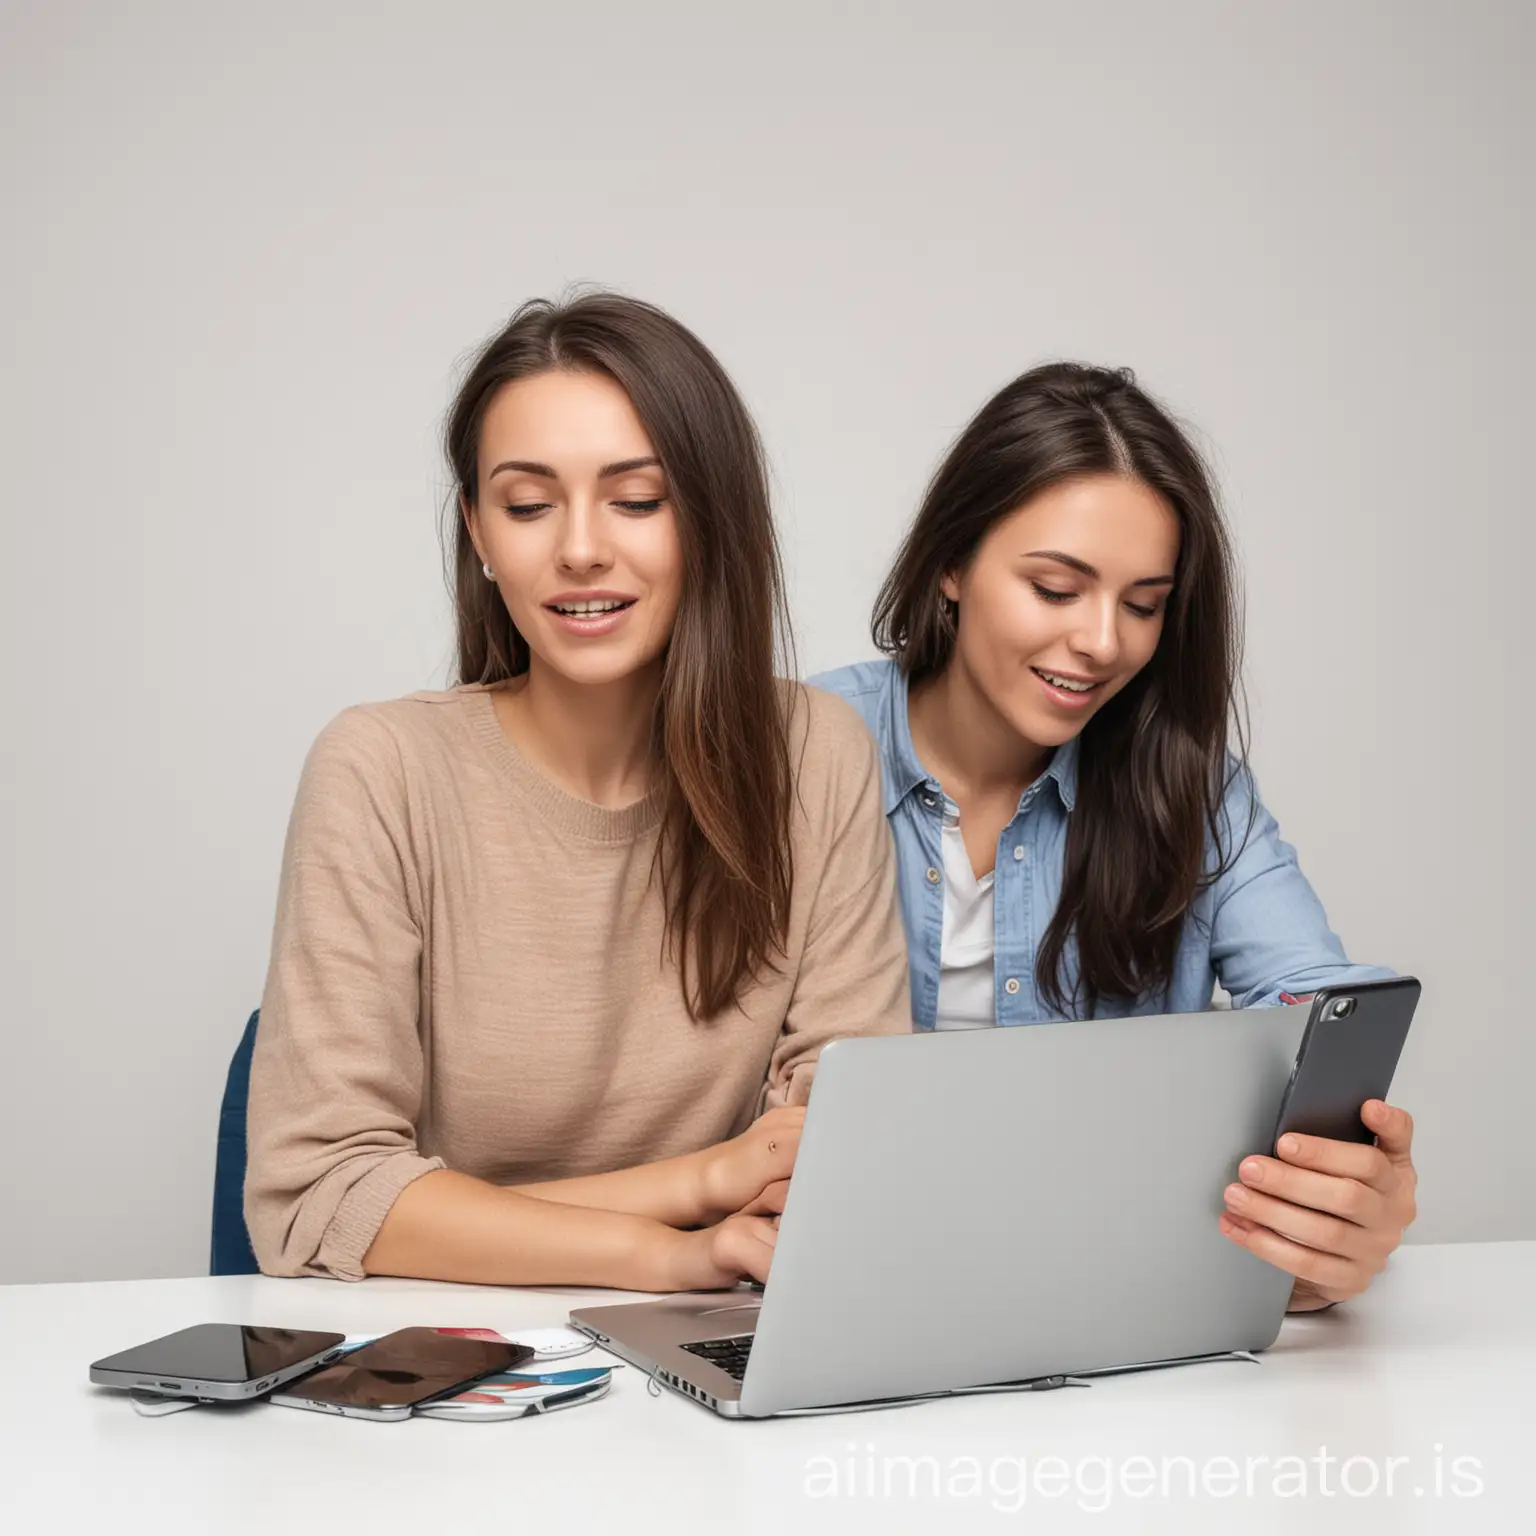 Man-Working-on-Laptop-and-Woman-Using-Smartphone-on-White-Background